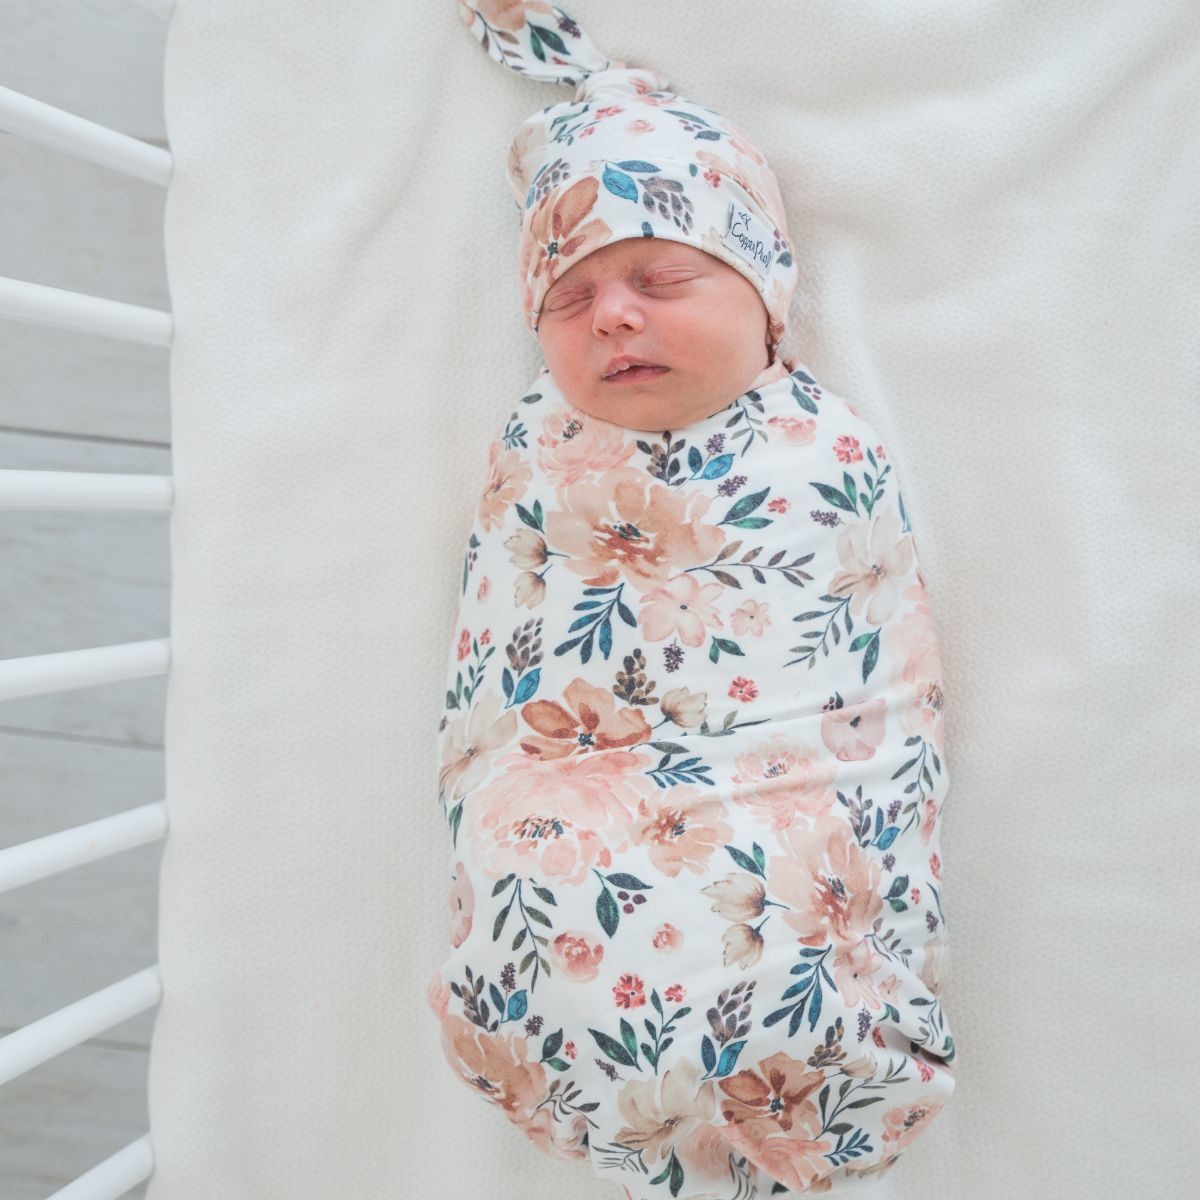 Copper Pearl Swaddle Blanket - Autumn.